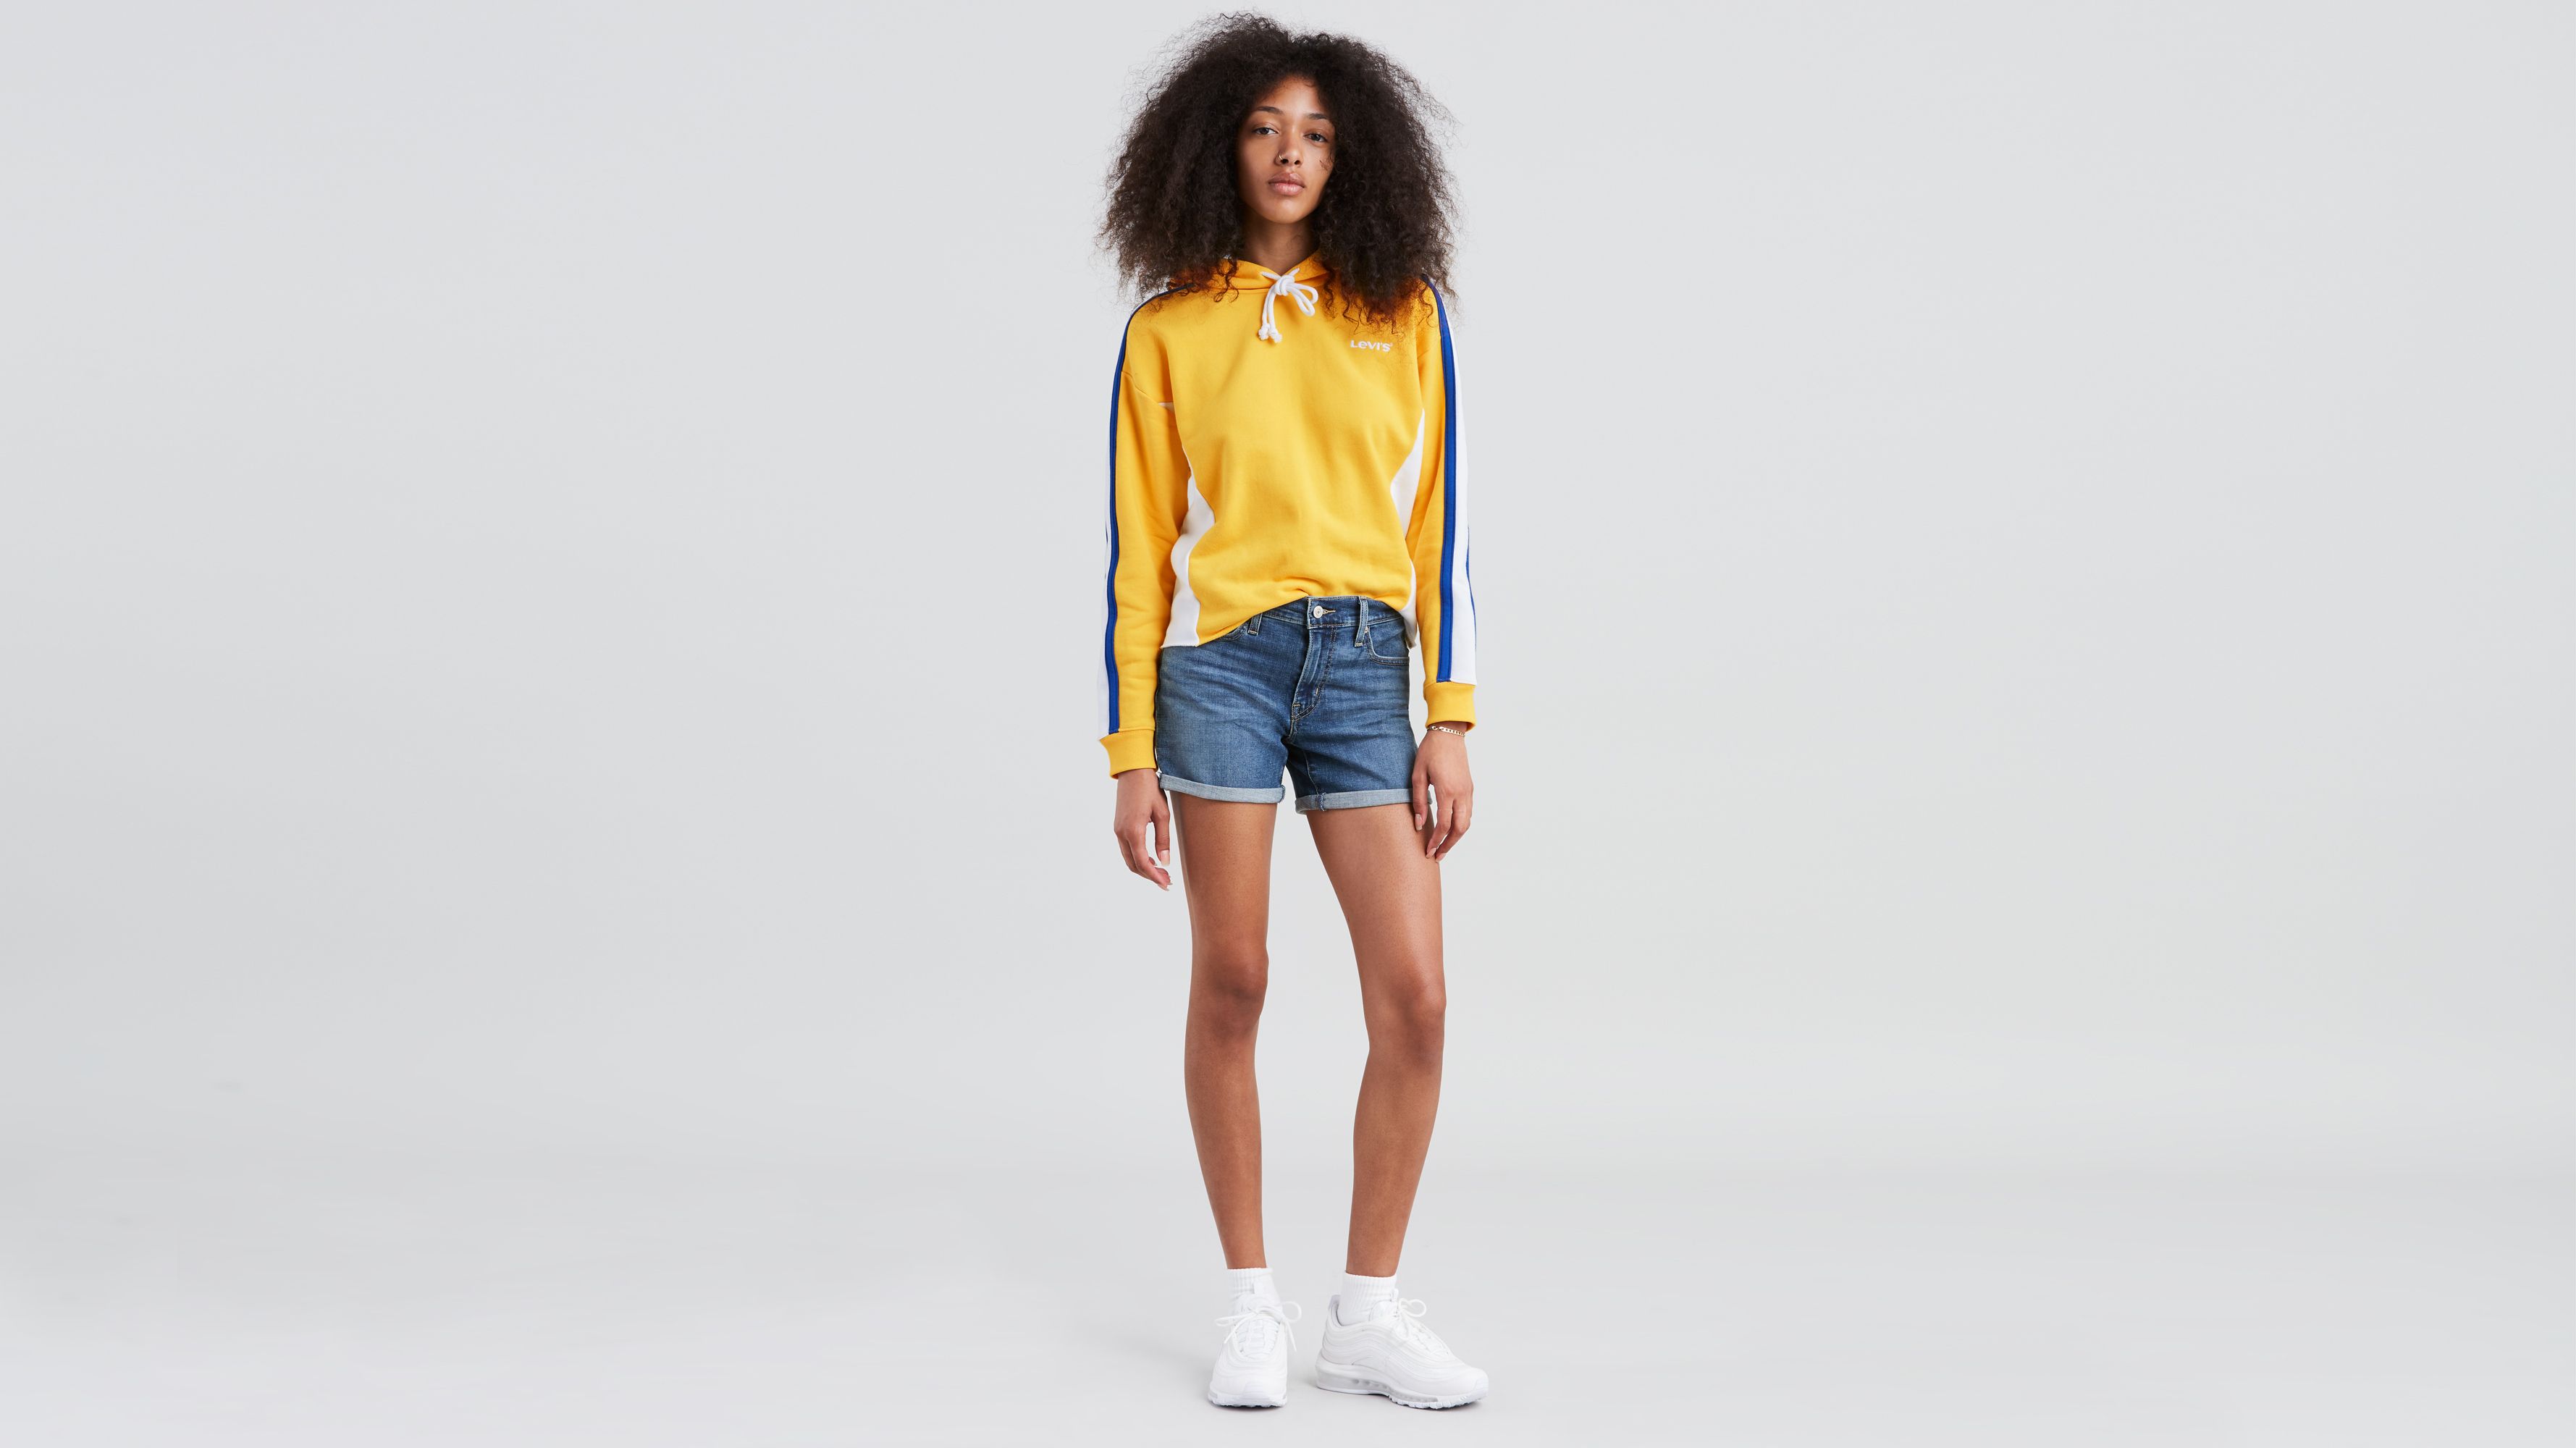 Shop Now For The Levis Mid Length Shorts - Womens 23 | IBT Shop